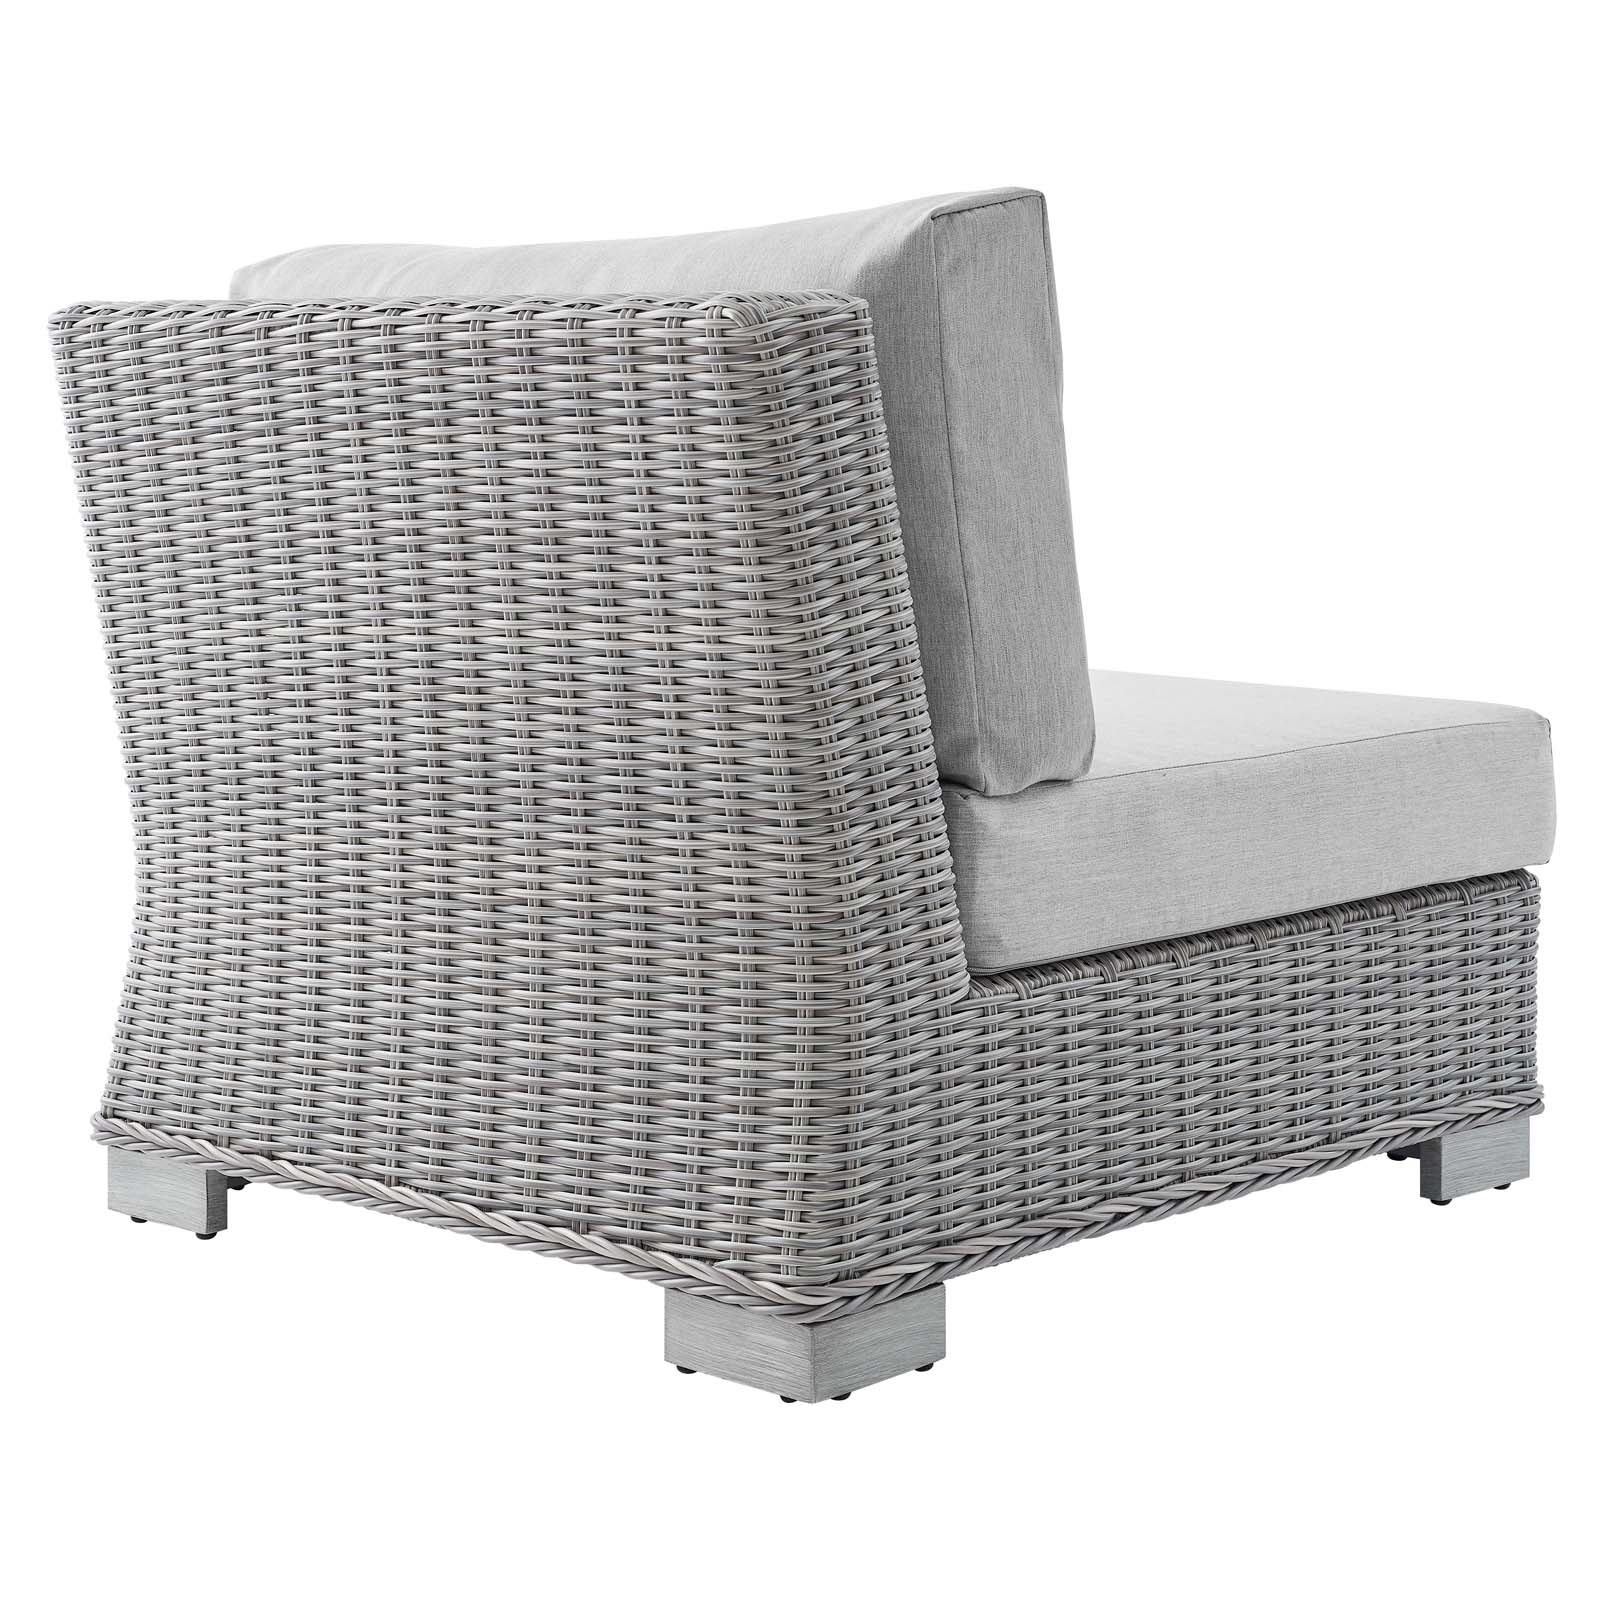 Modway Conway Sunbrella® Outdoor Patio Wicker Rattan Armless Chair in Light Gray Gray - image 4 of 9